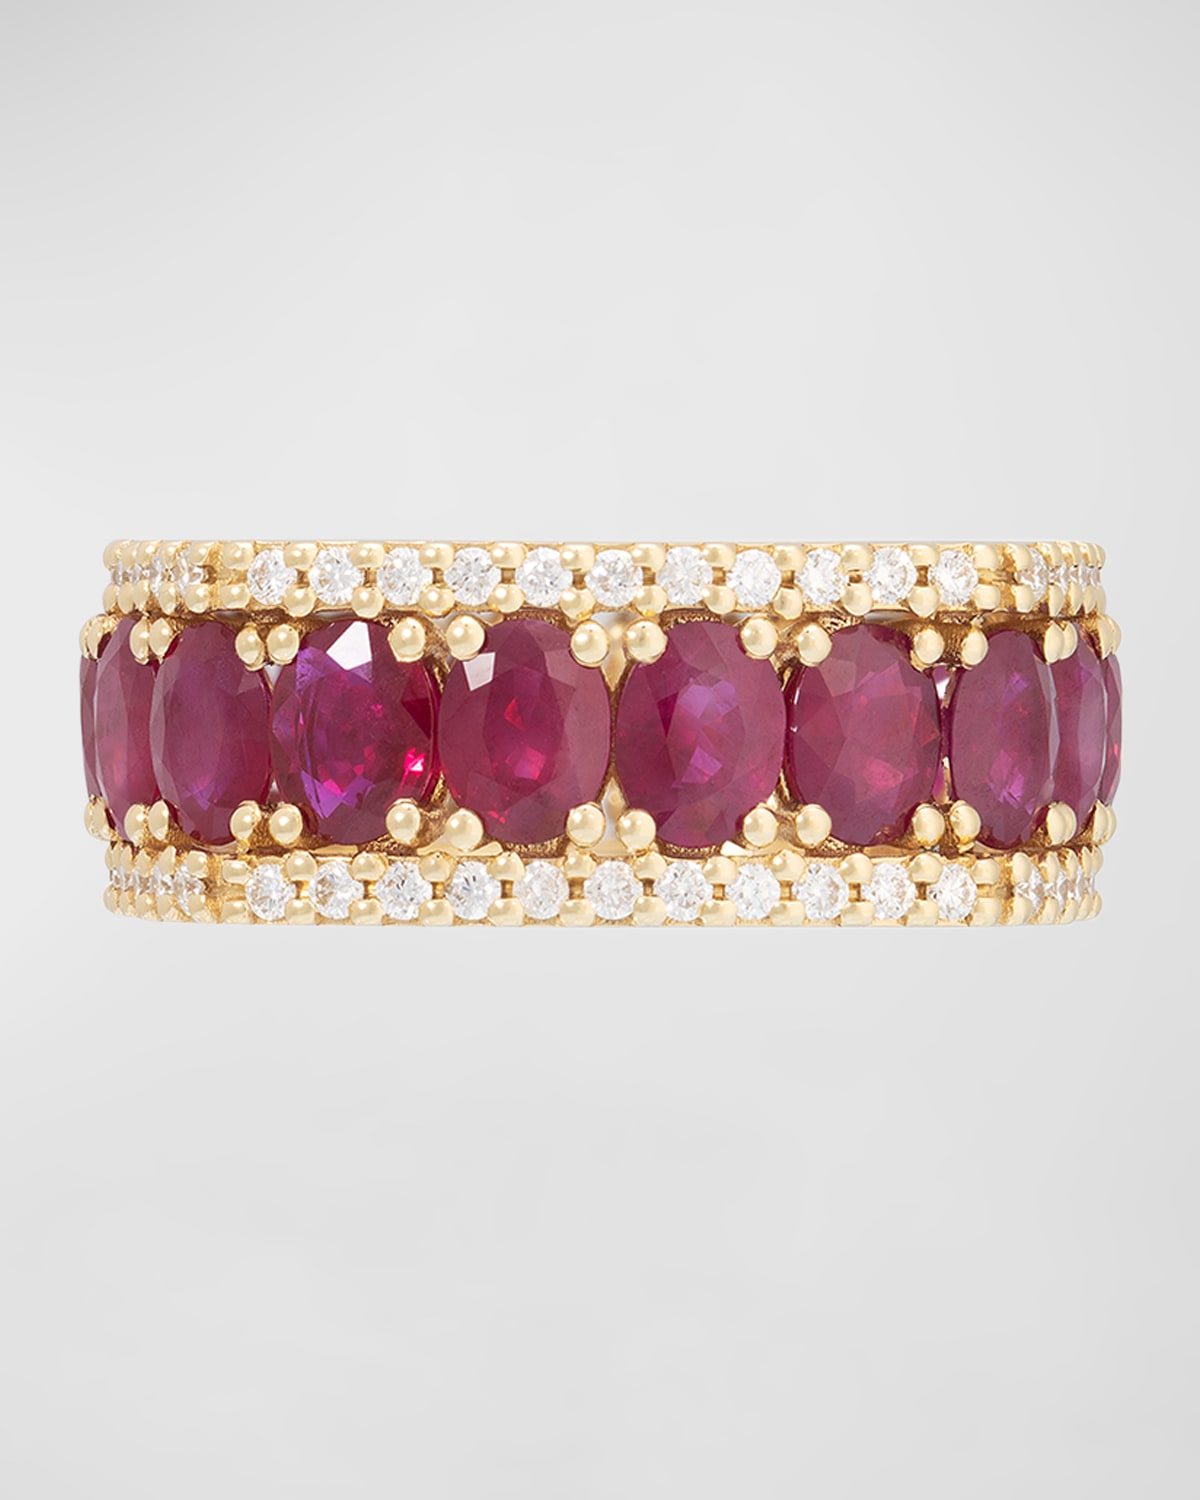 Miseno Procida 18k Rose Gold Ring With White Diamonds And Rubies